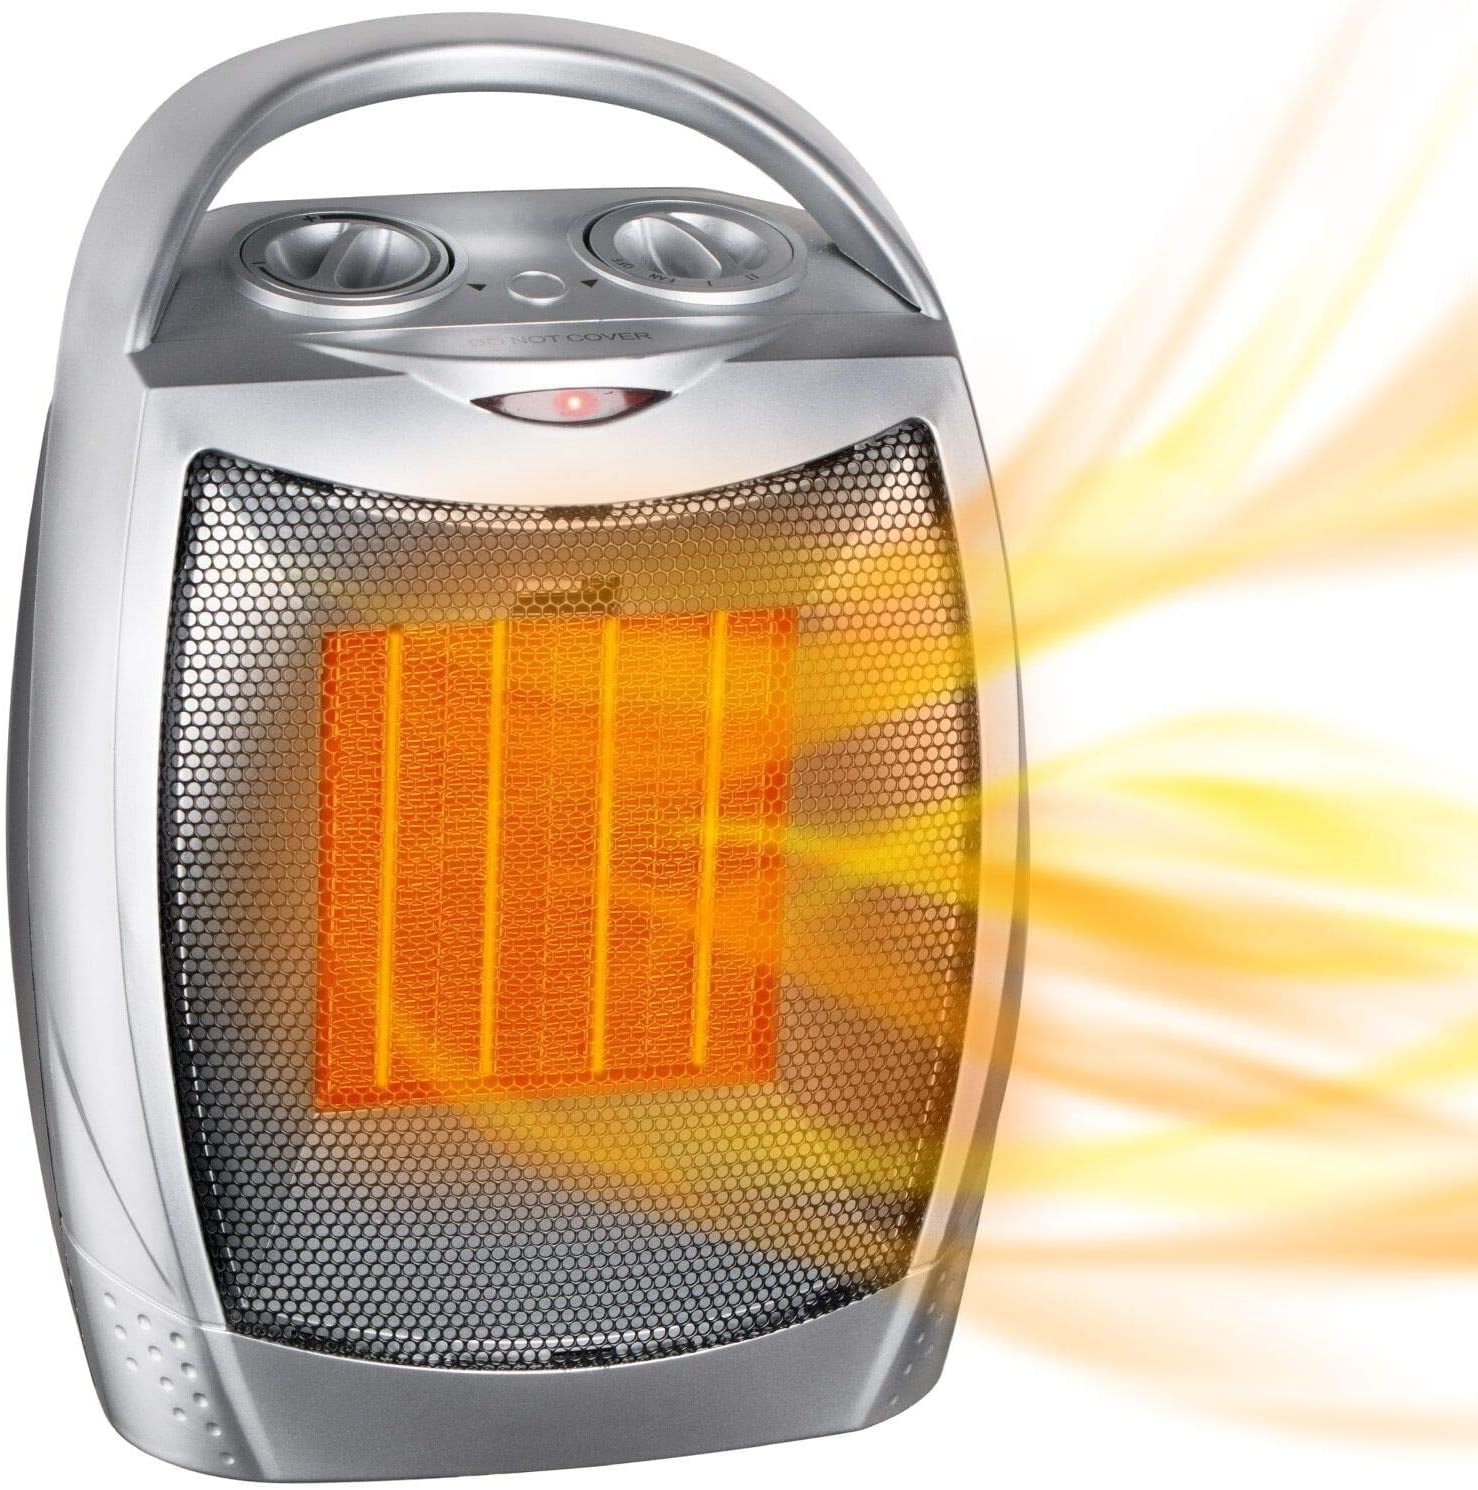 1500W Thermostat Ceramic Space Heater ETL Listed Hot & Cool PTC Heater Portable